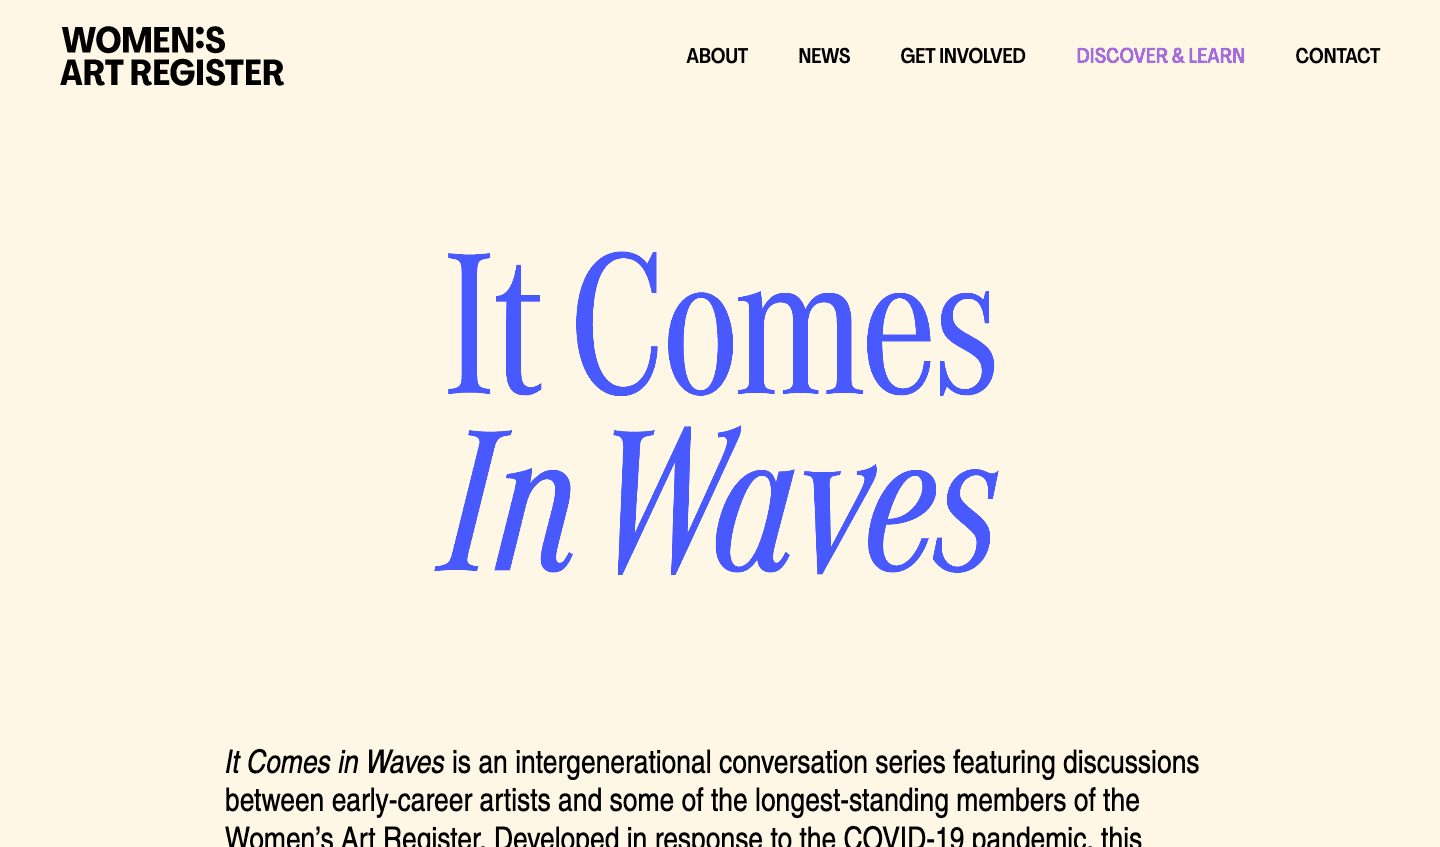 Screenshot of the "It Comes in Waves" conversation series page